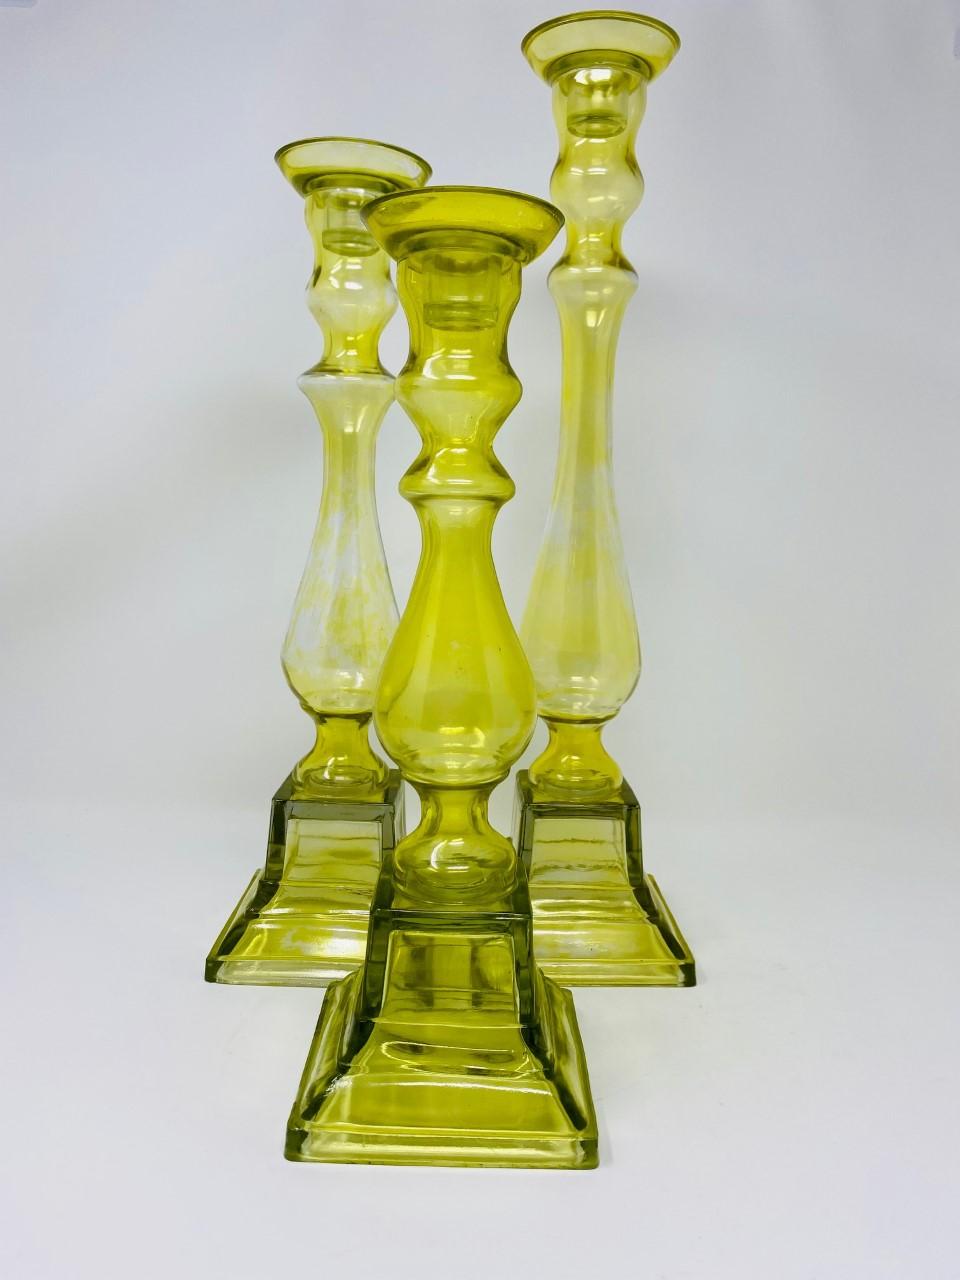 Beautiful set of yellow amber glass candleholders. Each candleholder is a different height and the trio beautifully complement different décor styles with style and beauty. Each piece is designed in a Classic candleholder shape but is constructed in